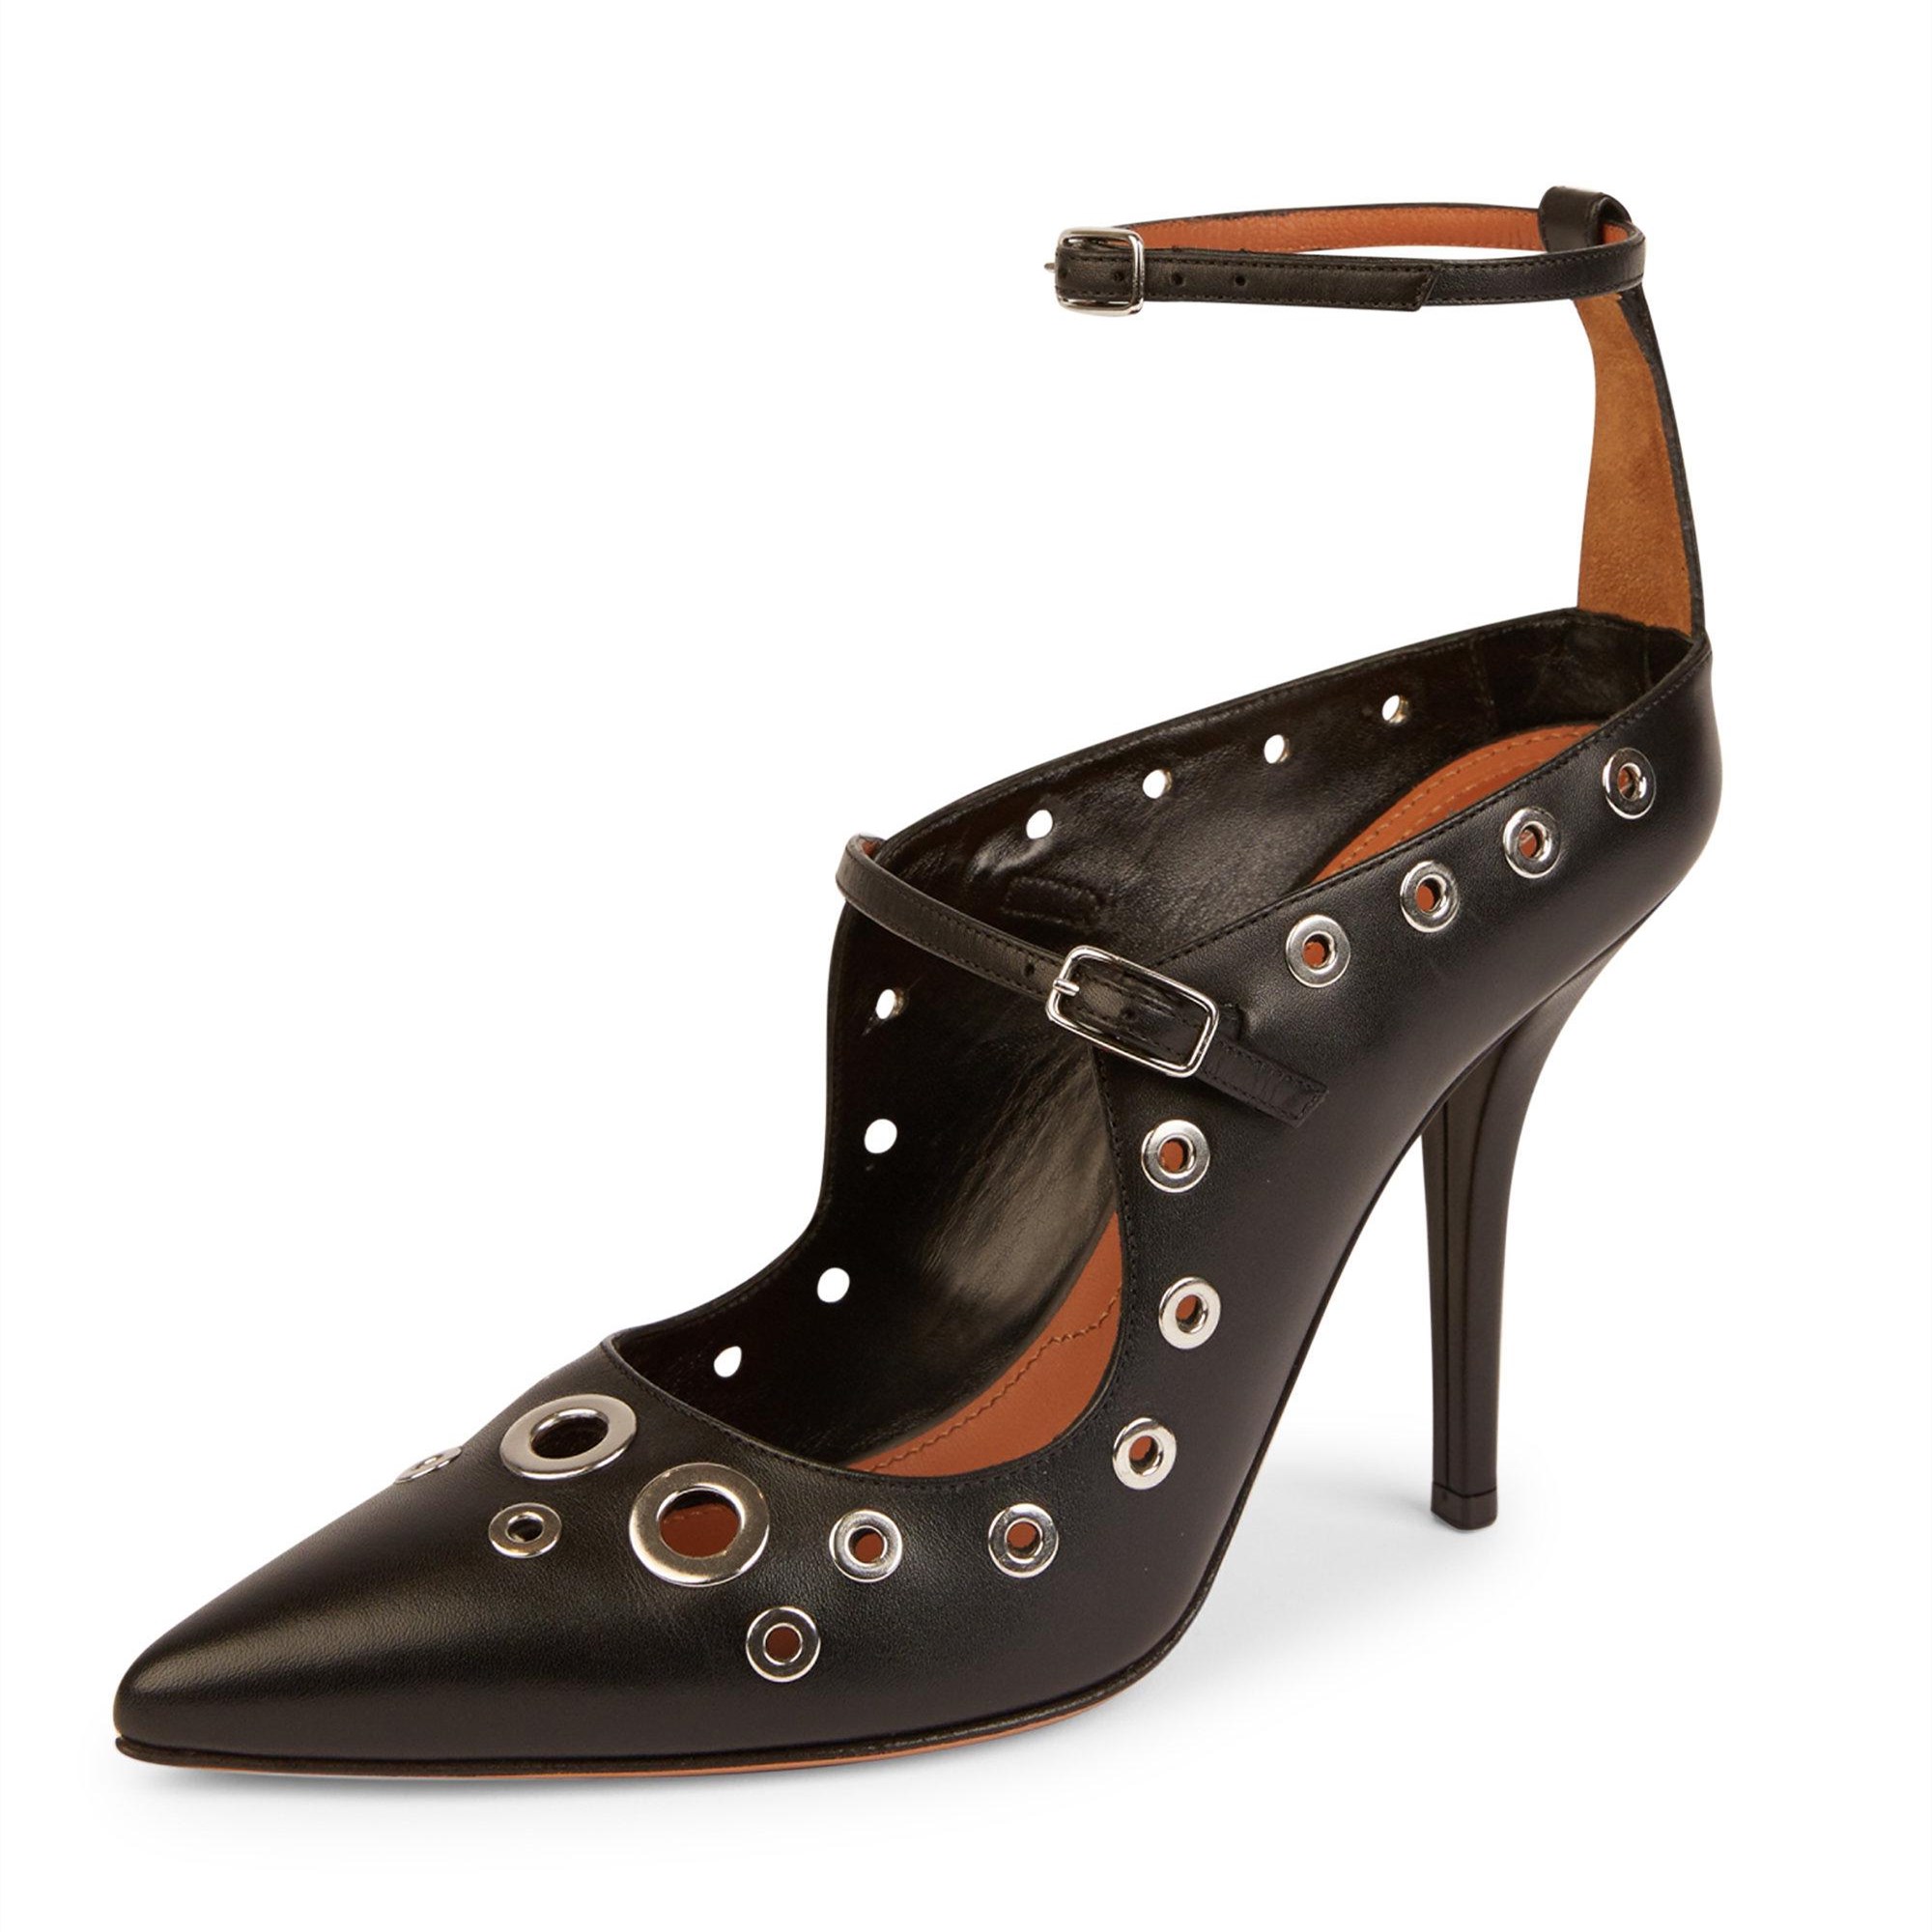 Black Studded Pointed Toe Ankle Strap Heels with 4-inch Heels Vdcoo